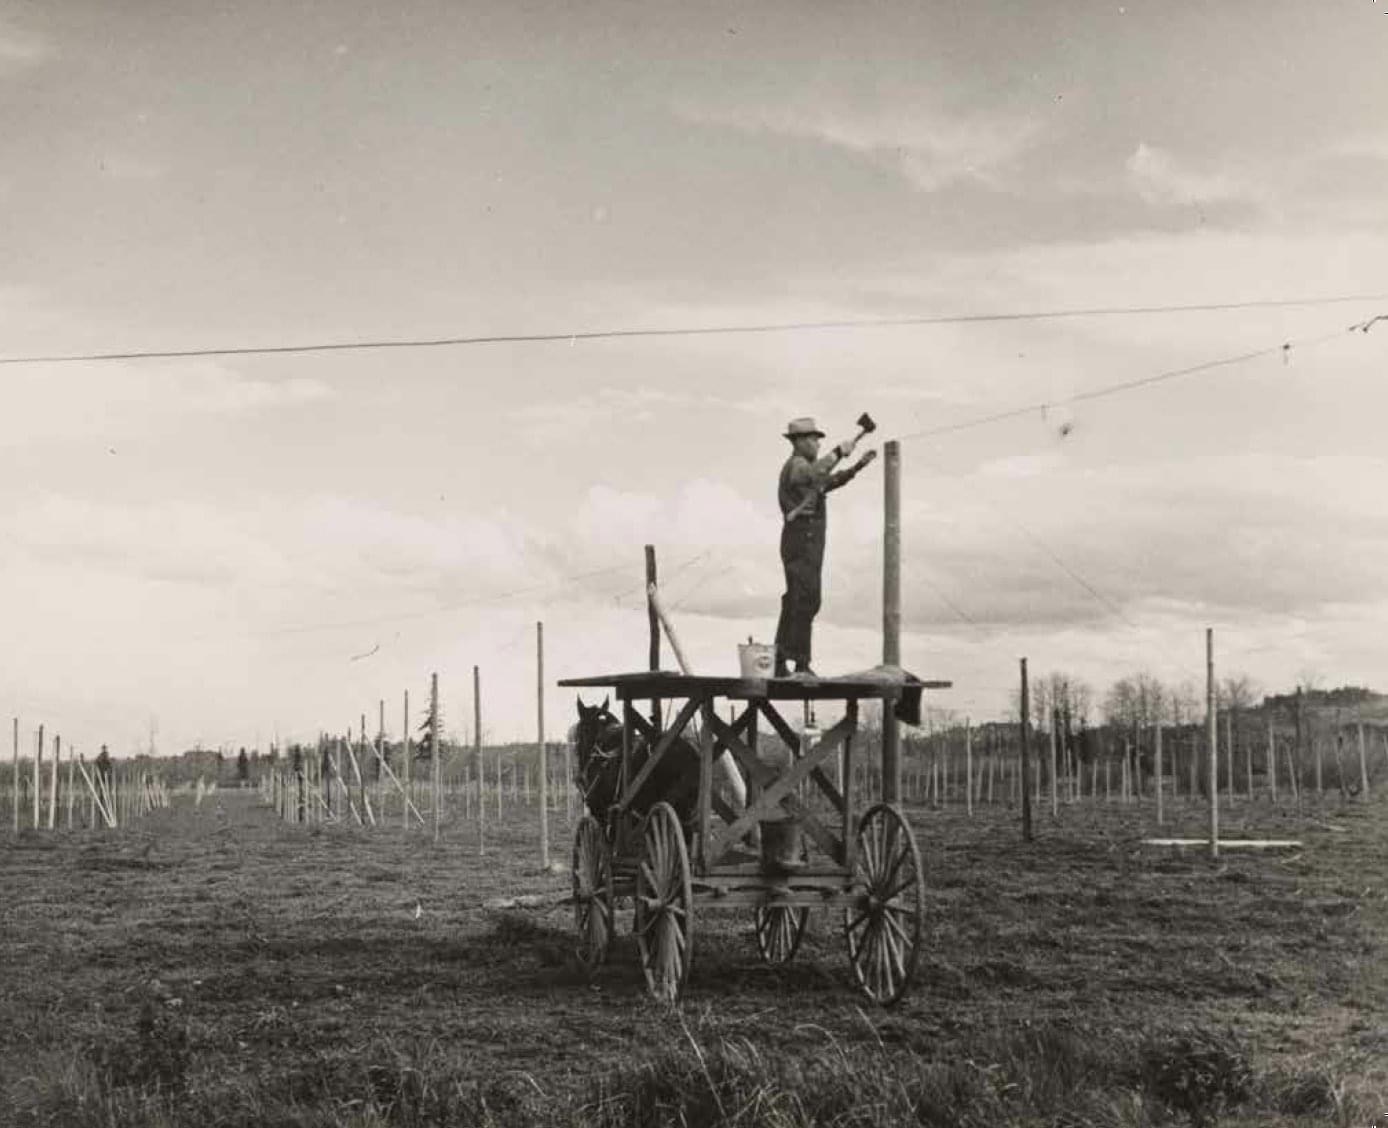 Securing wire to poles with tractor pulling high tower, 1952